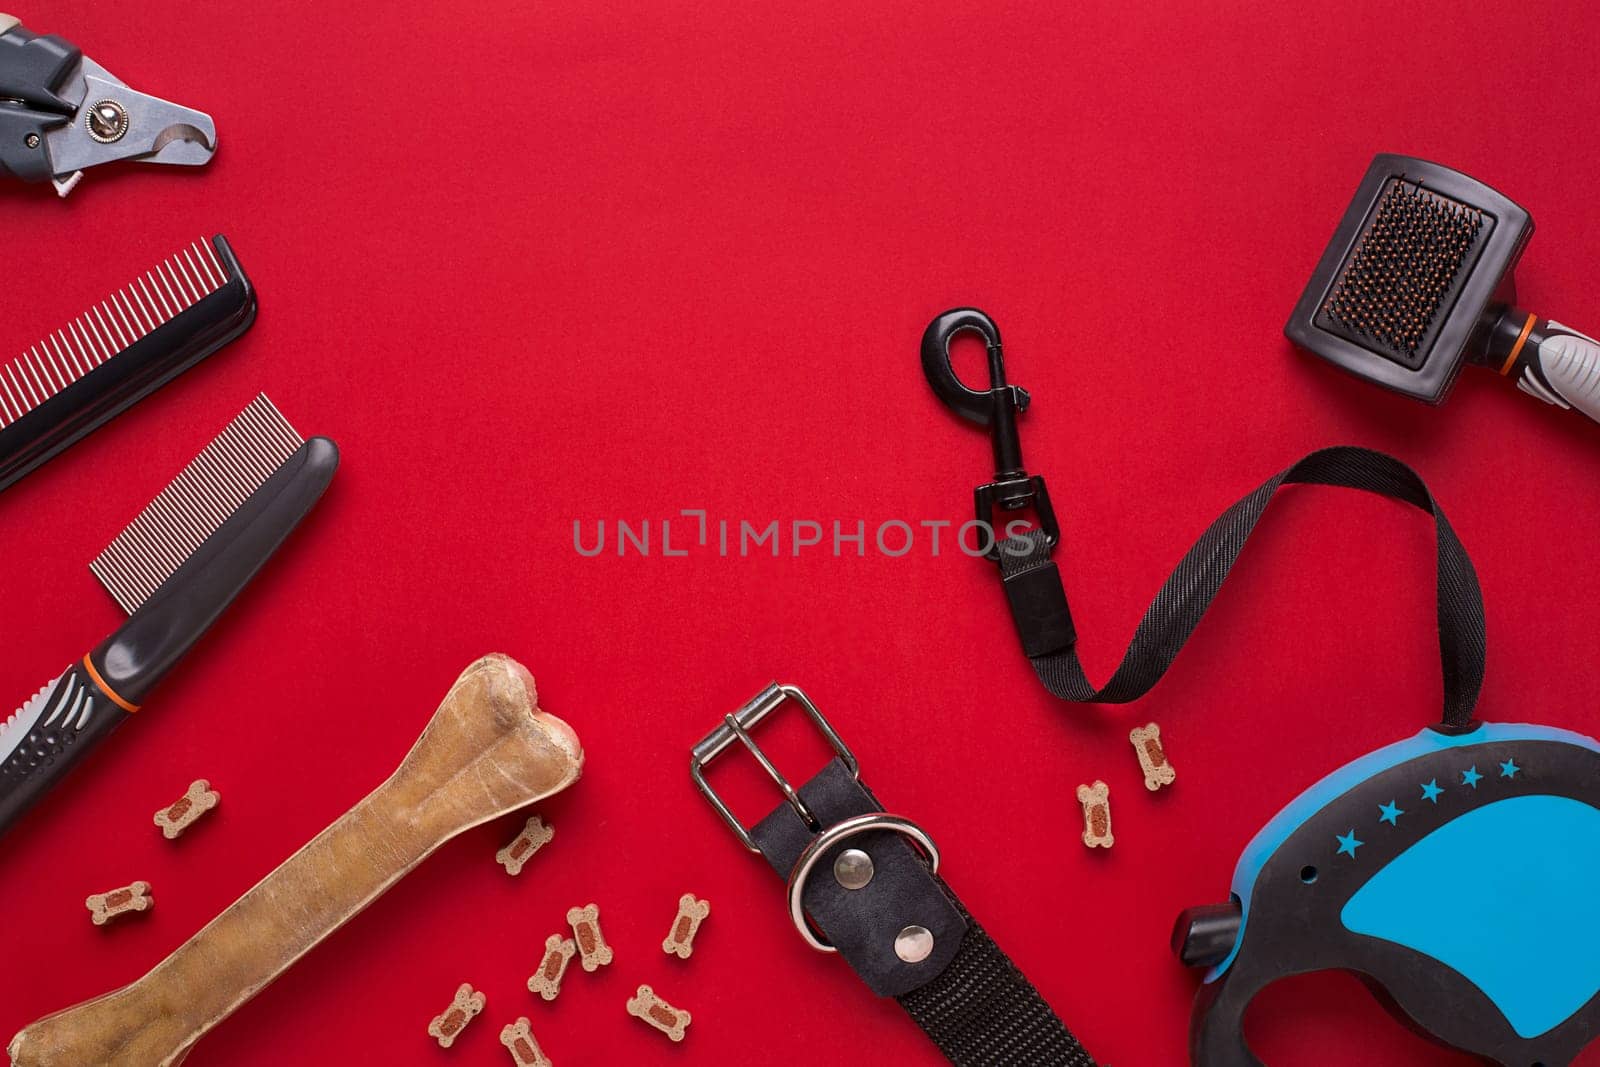 Collar, bowl with feed, leash, delicacy, combs and brushes for dogs. Isolated on red background. Top view. Still life. Copy space